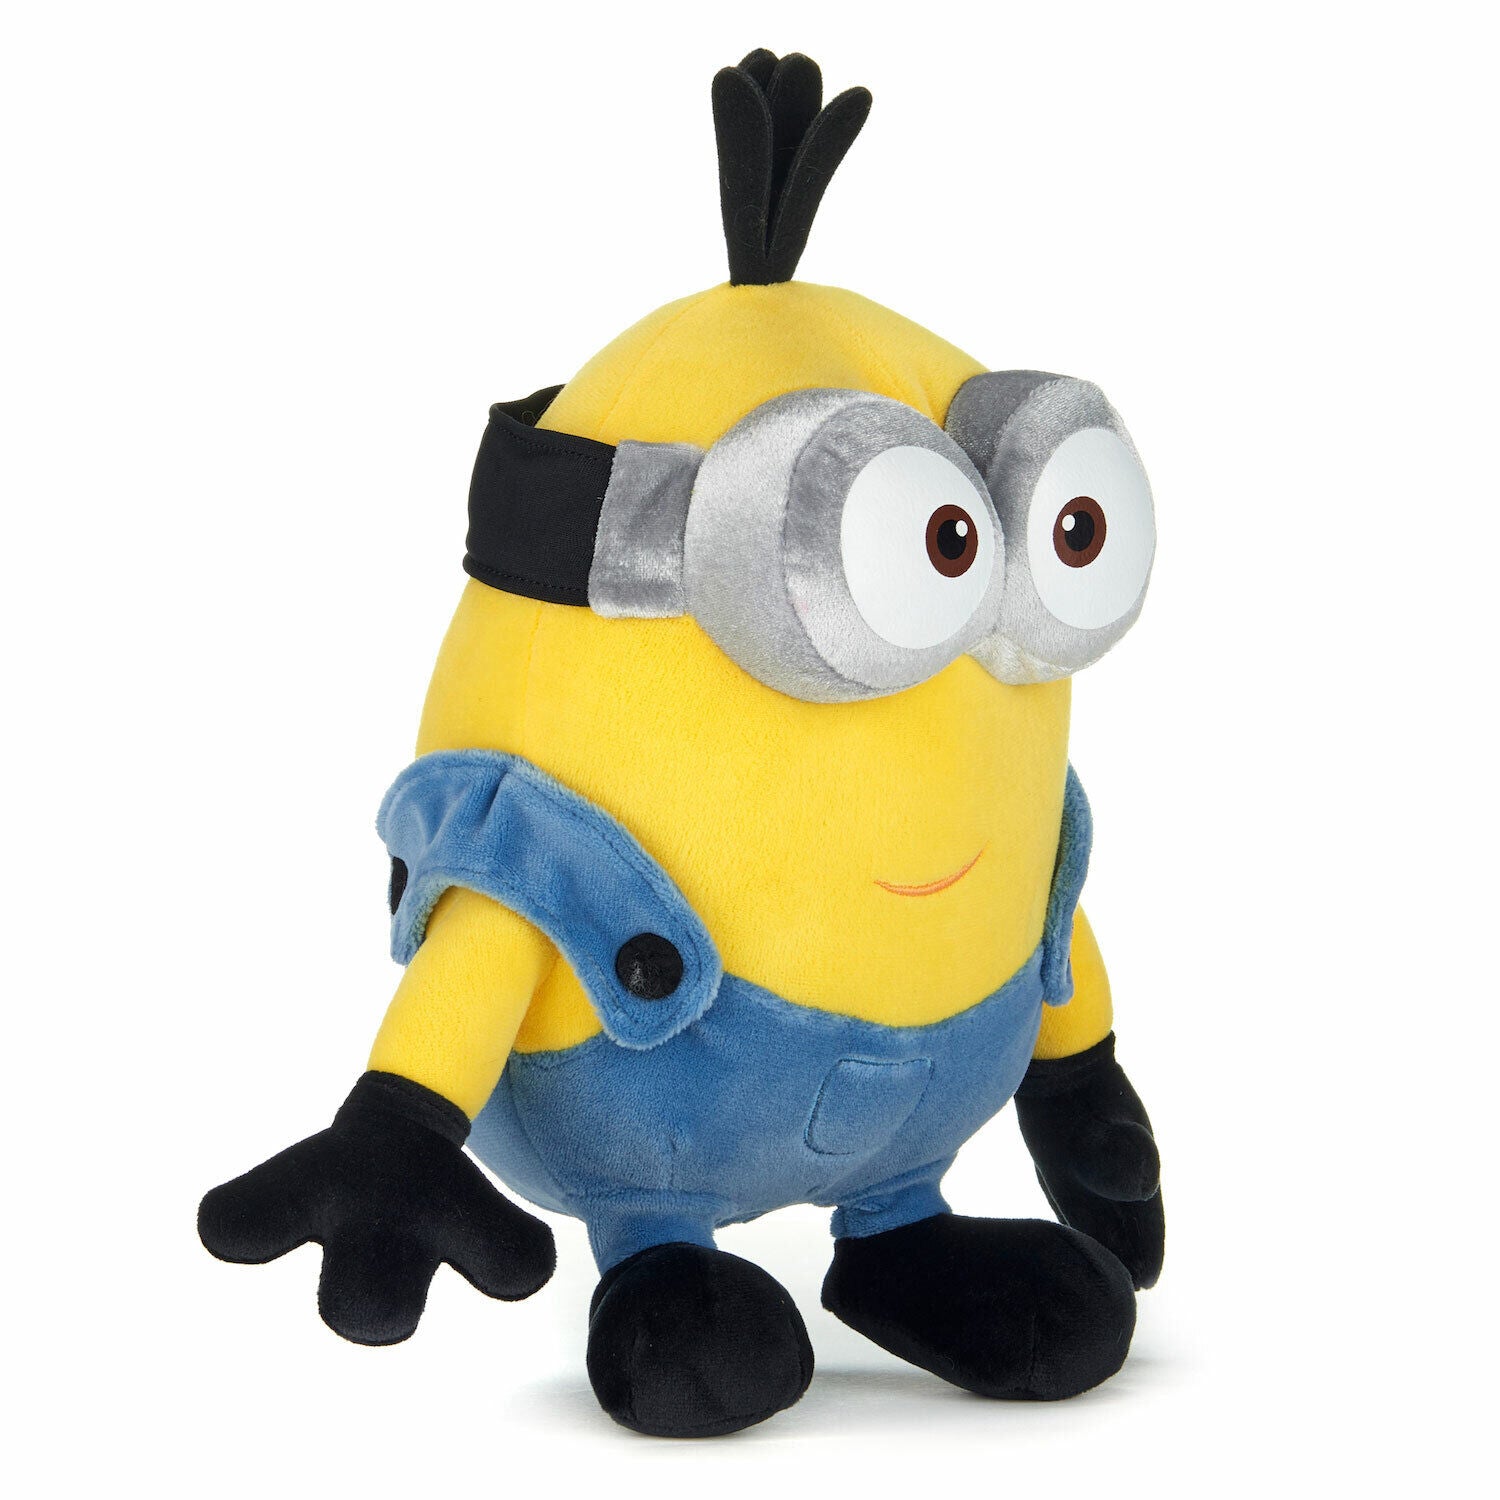 New Minions The Rise of Gru 10-Inch Cuddly Kevin Plush Toy